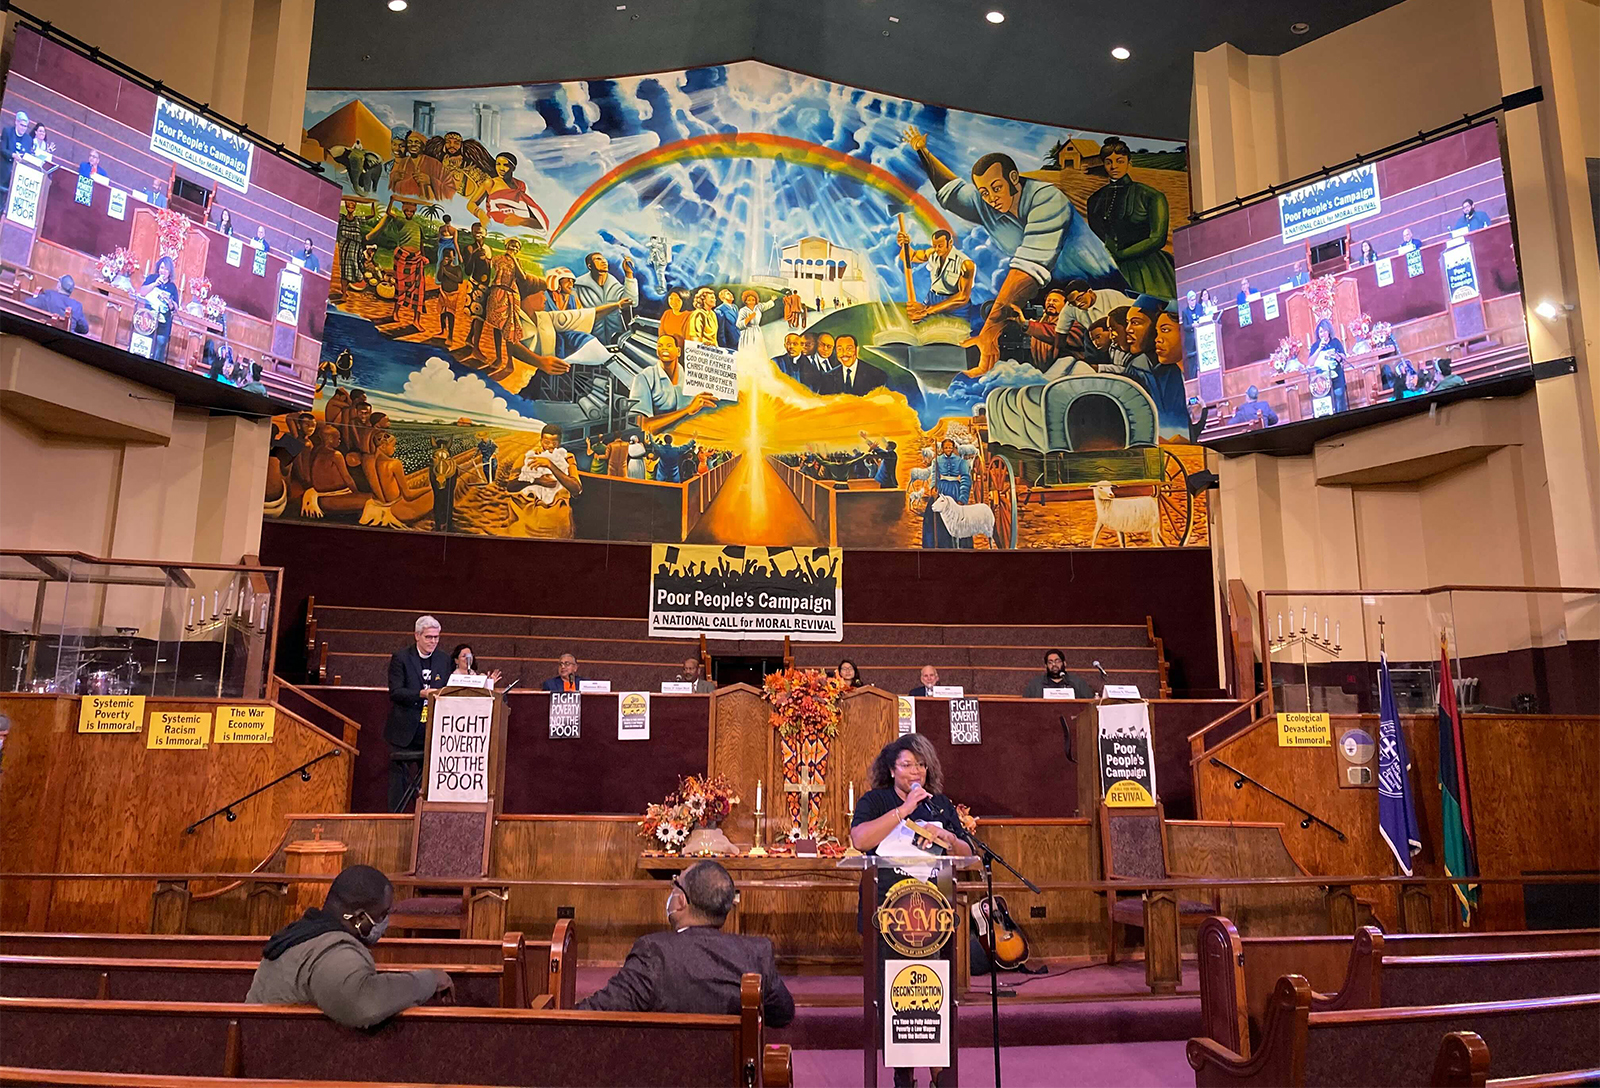 Colleen Thomas, bottom center at podium, speaks during the “Constructing a Moral Narrative: Dismantling Christian Nationalism" panel at First African Methodist Episcopal Church in Los Angeles. RNS photo by Alejandra Molina